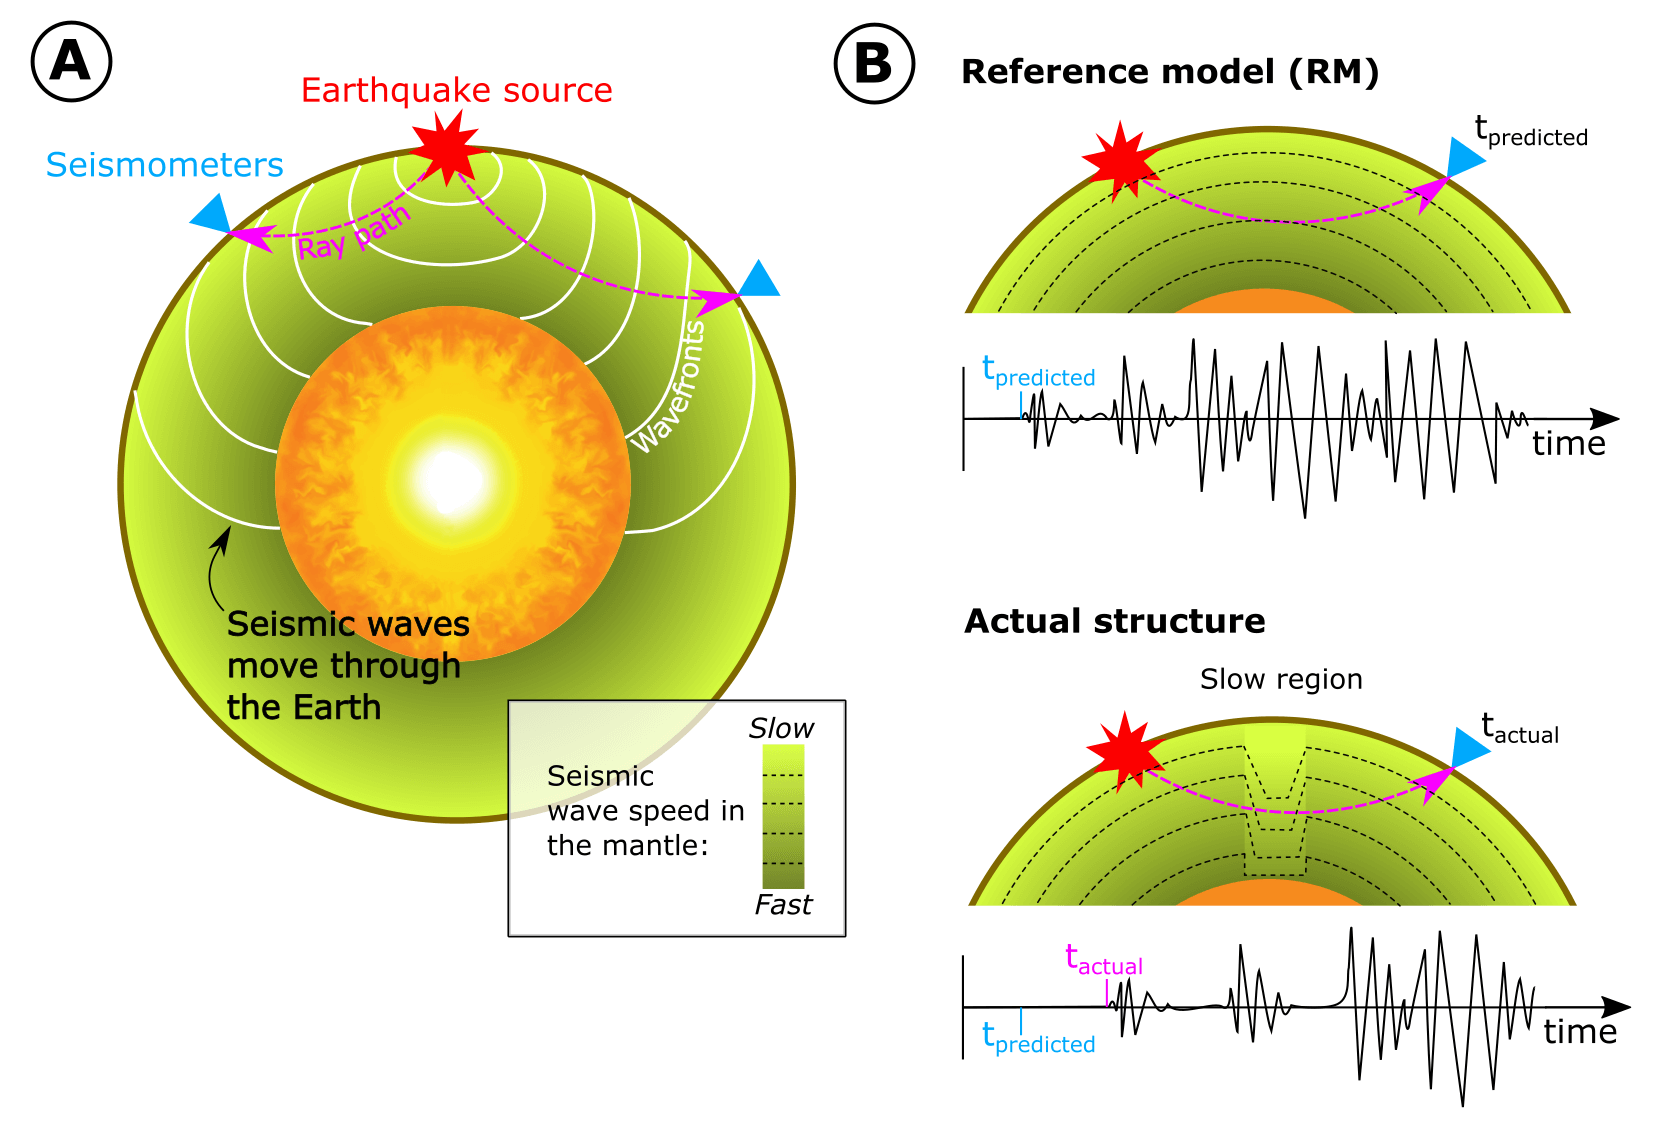 Seismic waves spreading through the Earth.